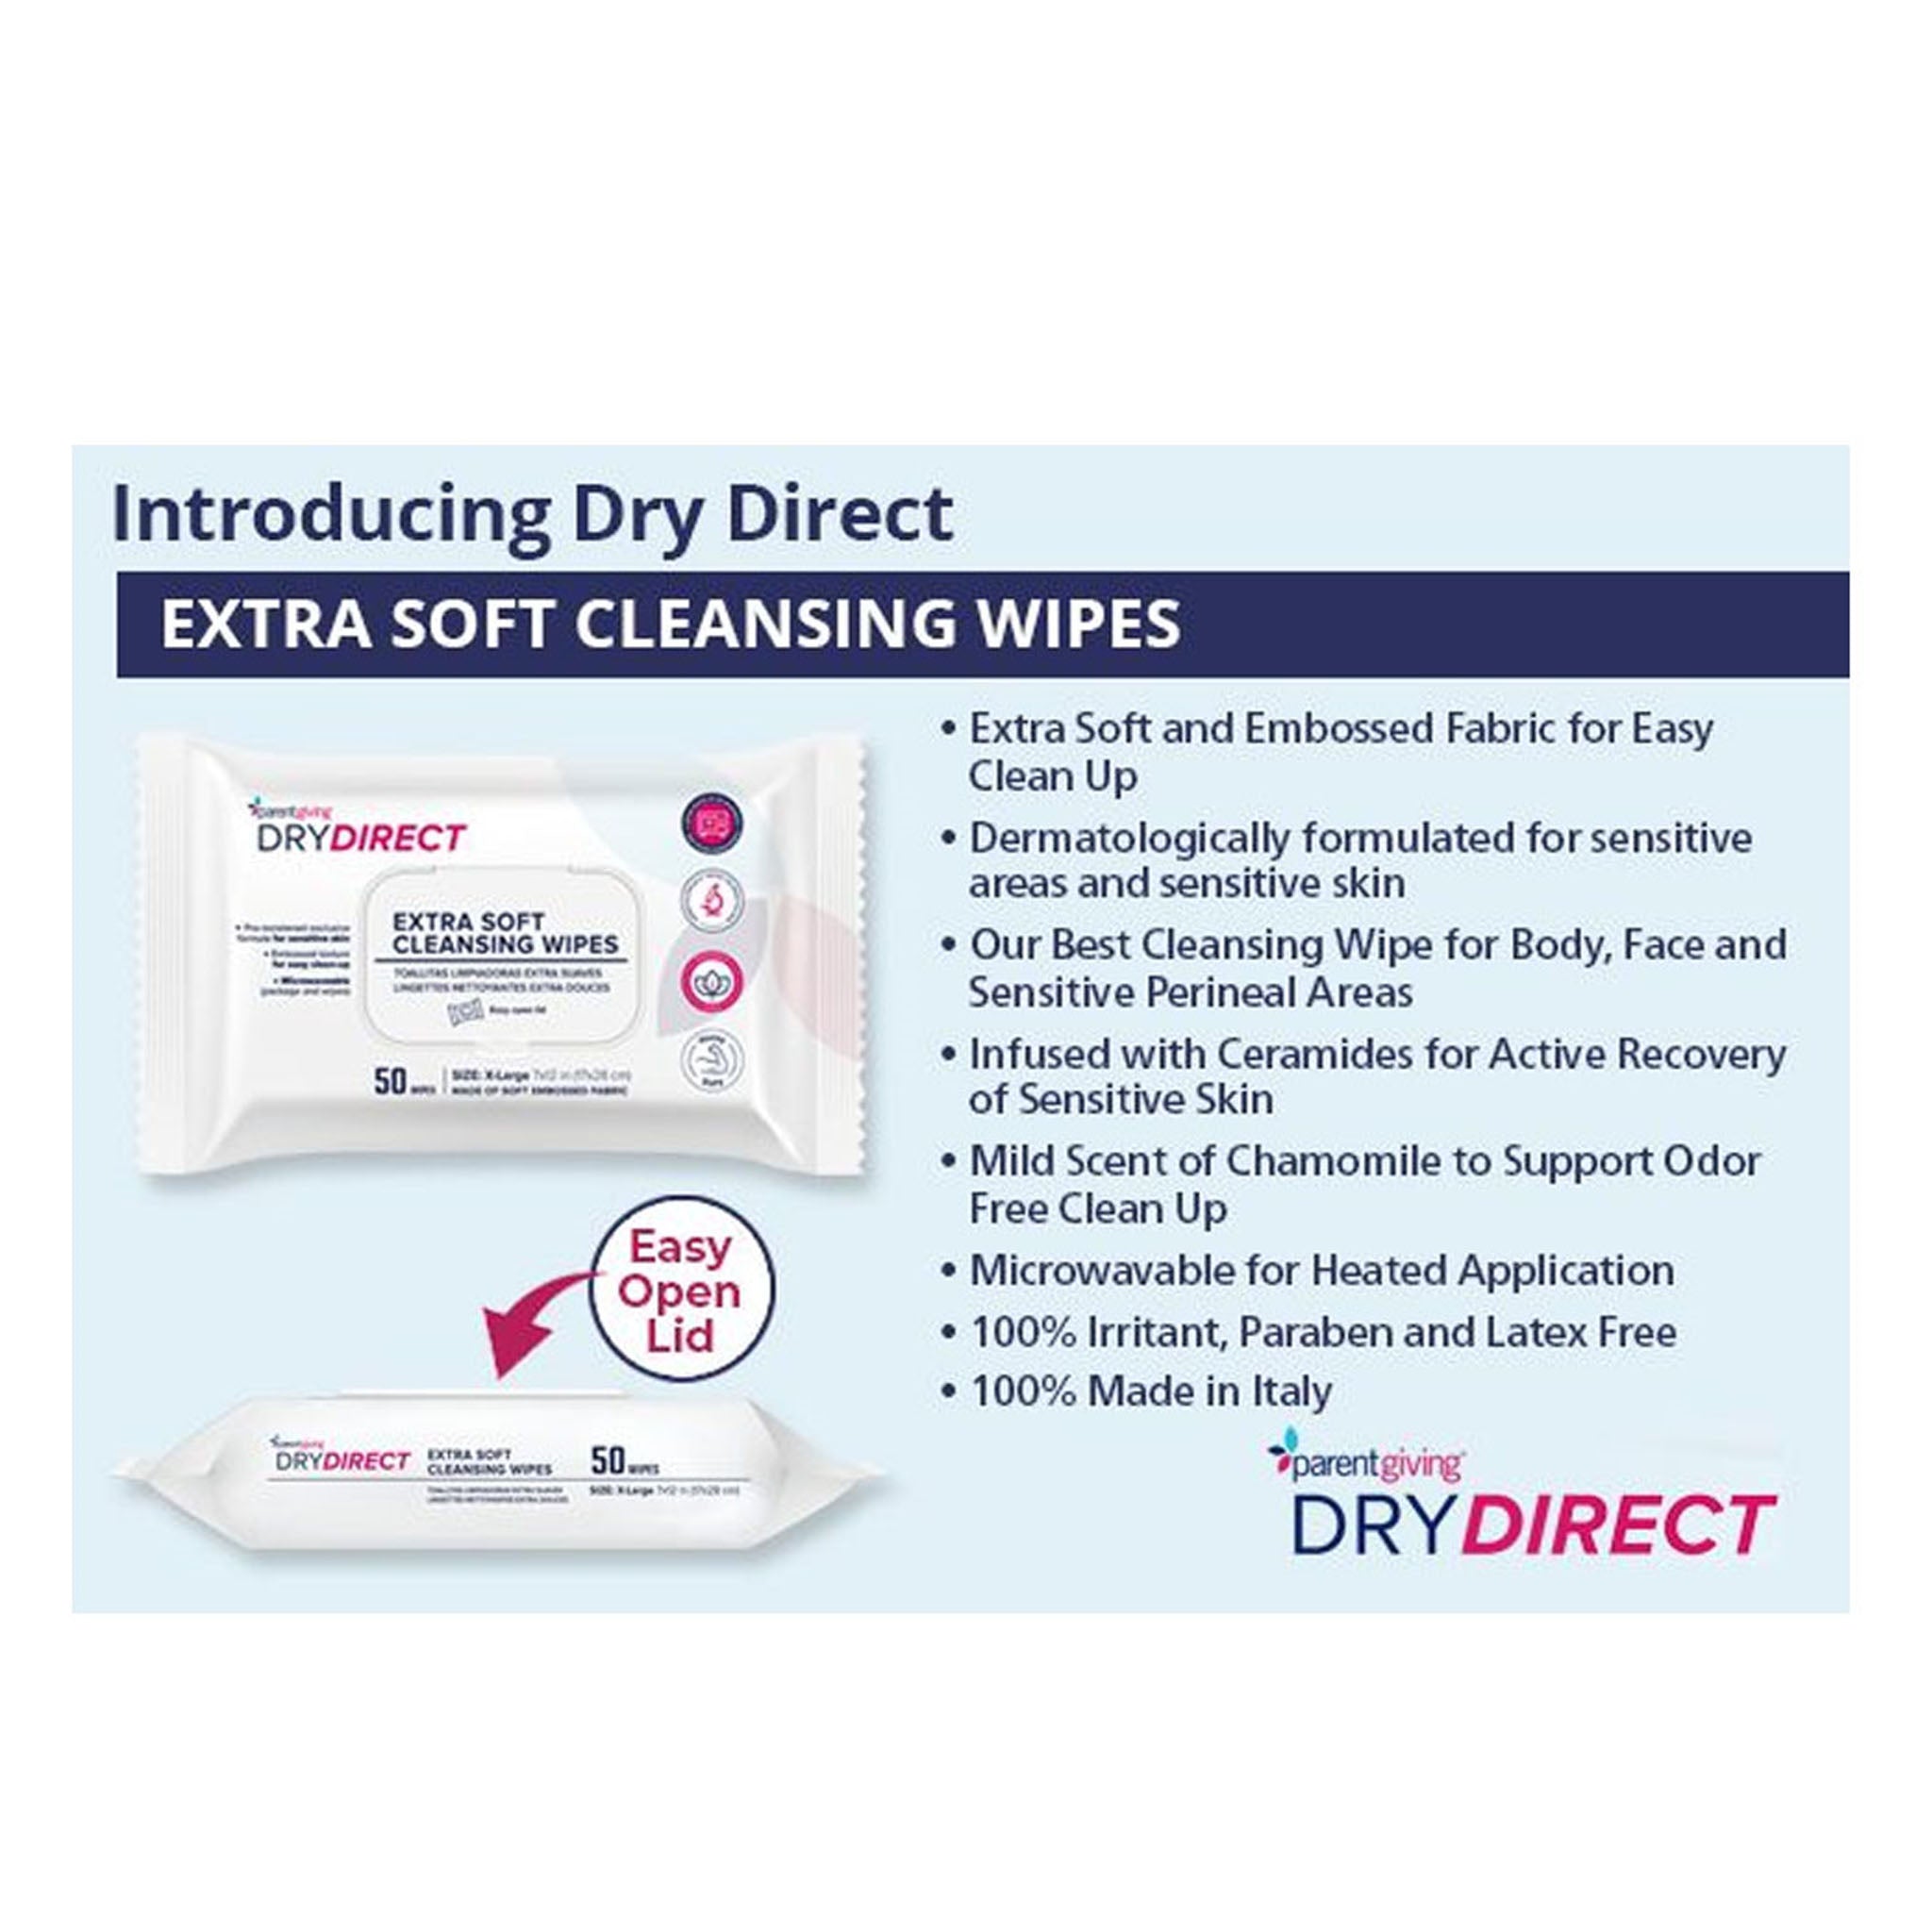 Dry Direct Extra Soft Cleansing Wipes